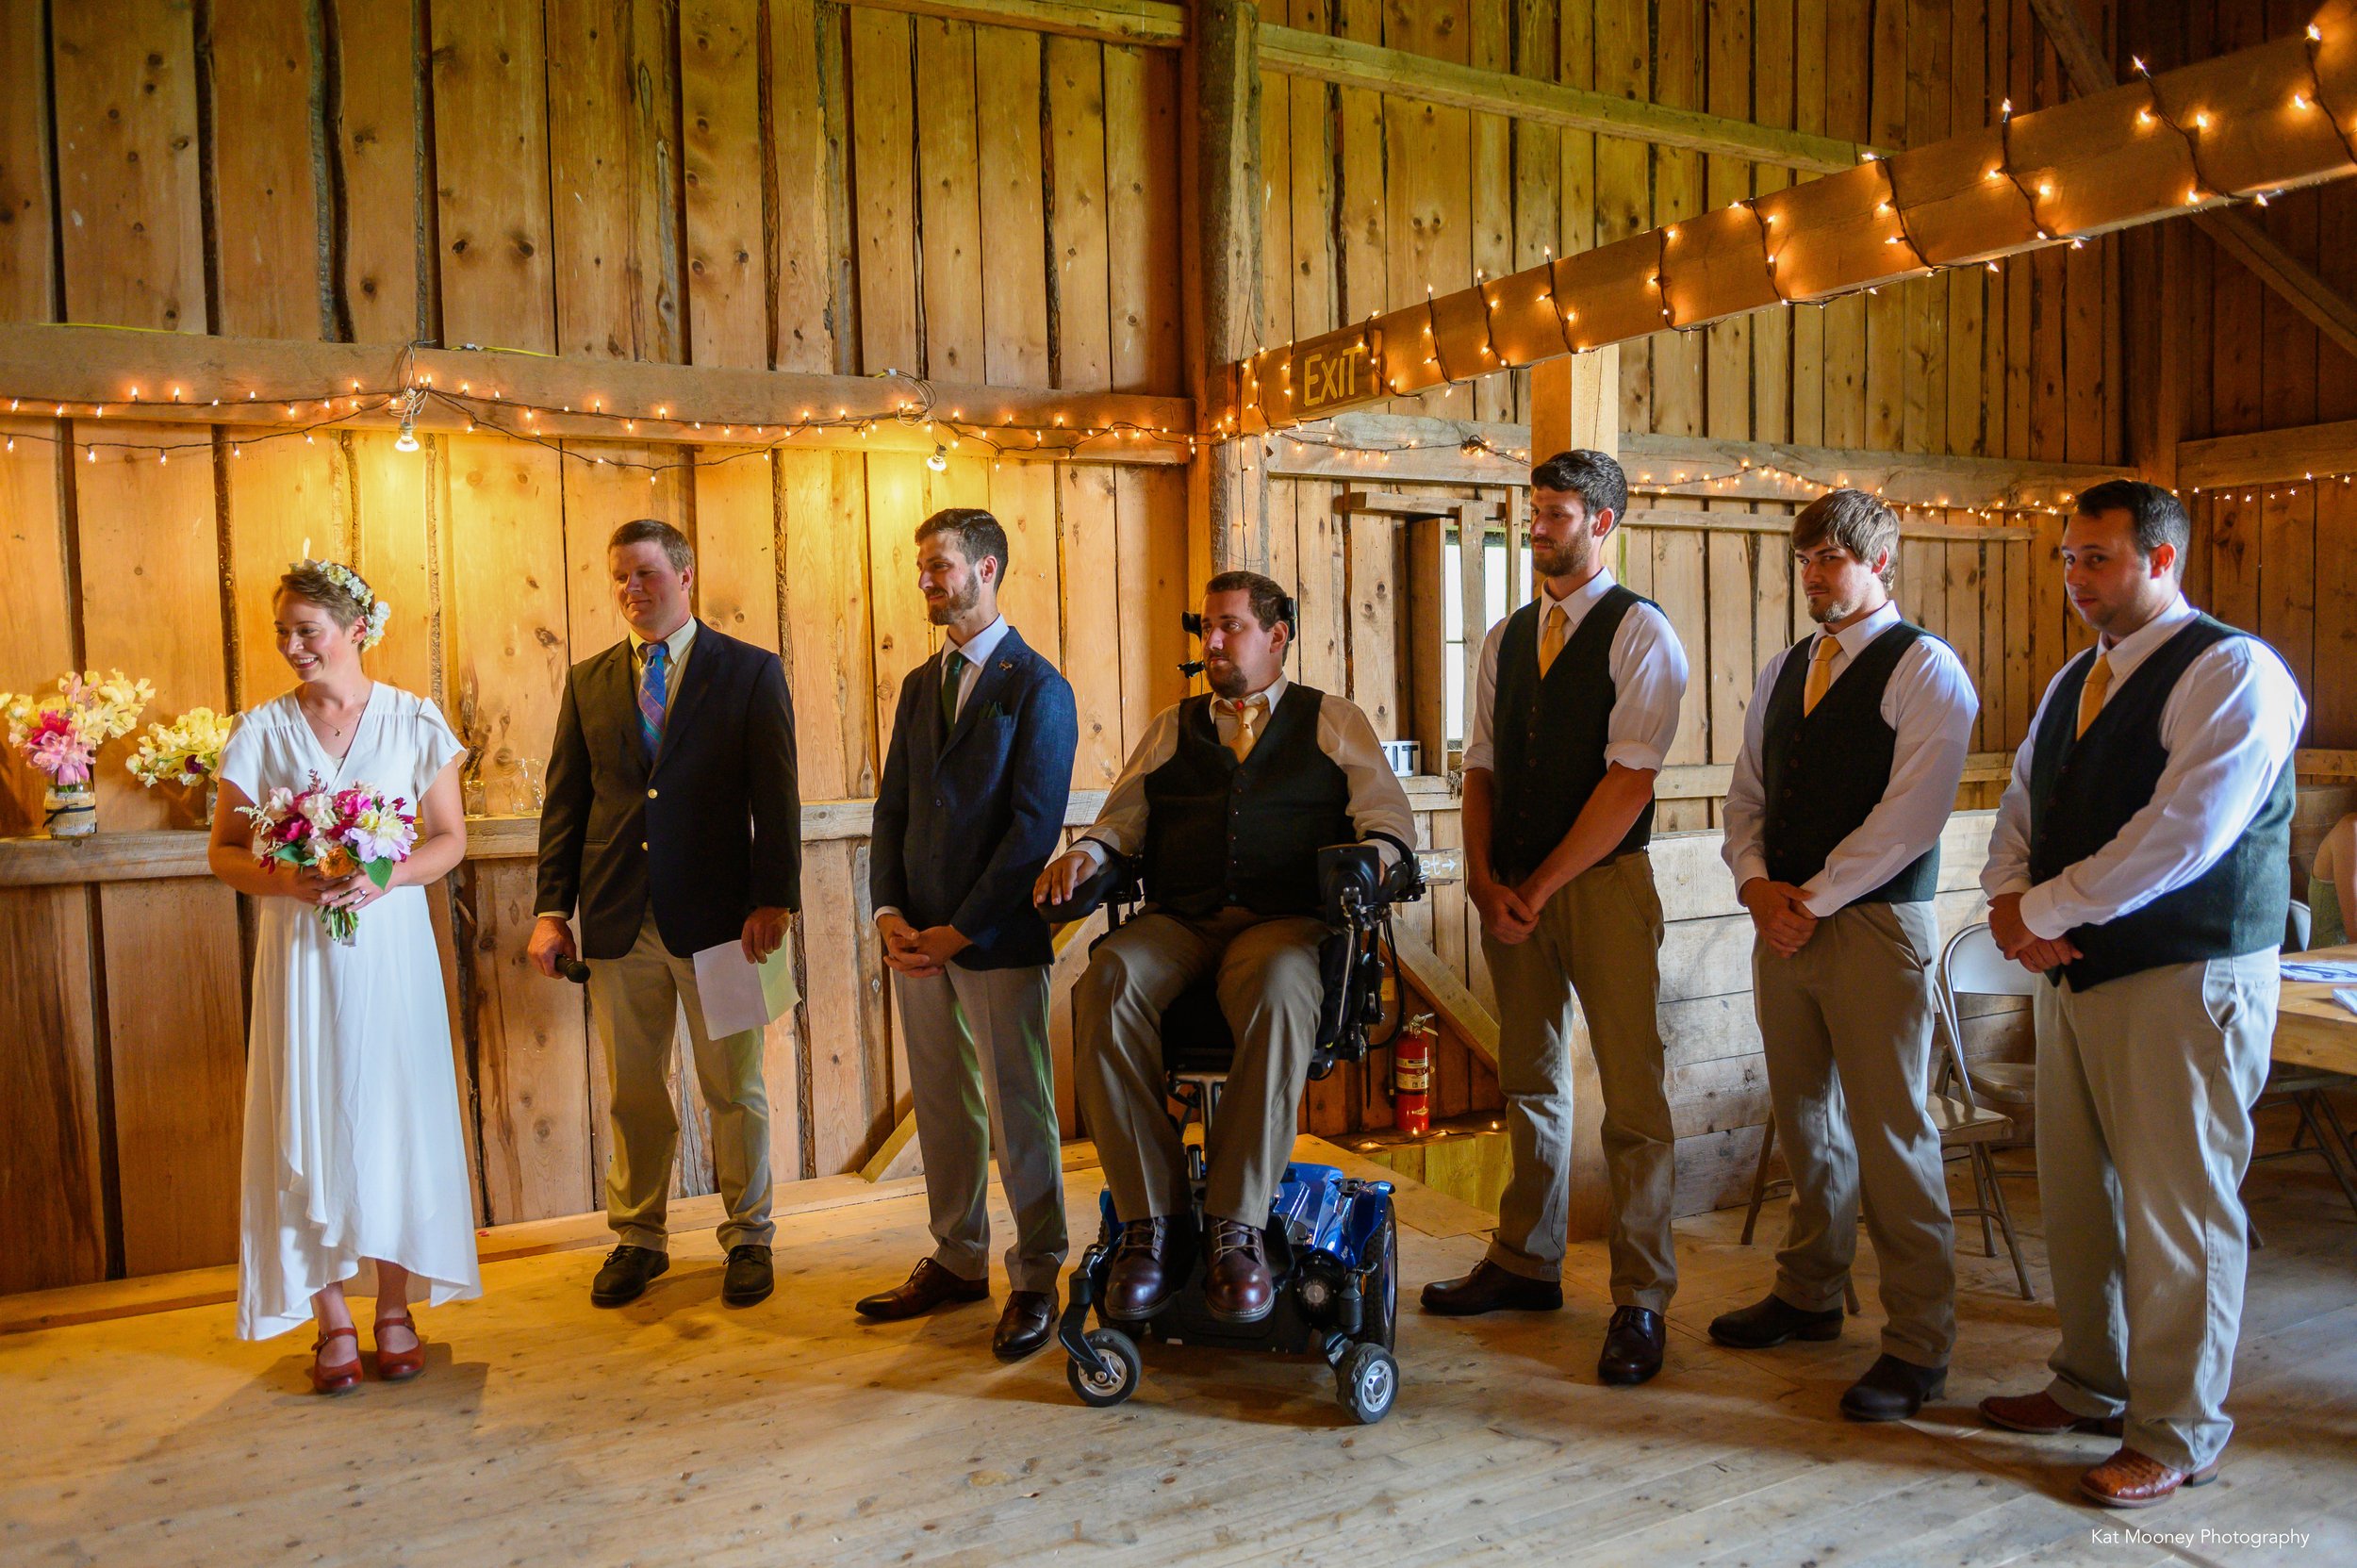 A bride standing with the groom and groomsmen inside the lit barn